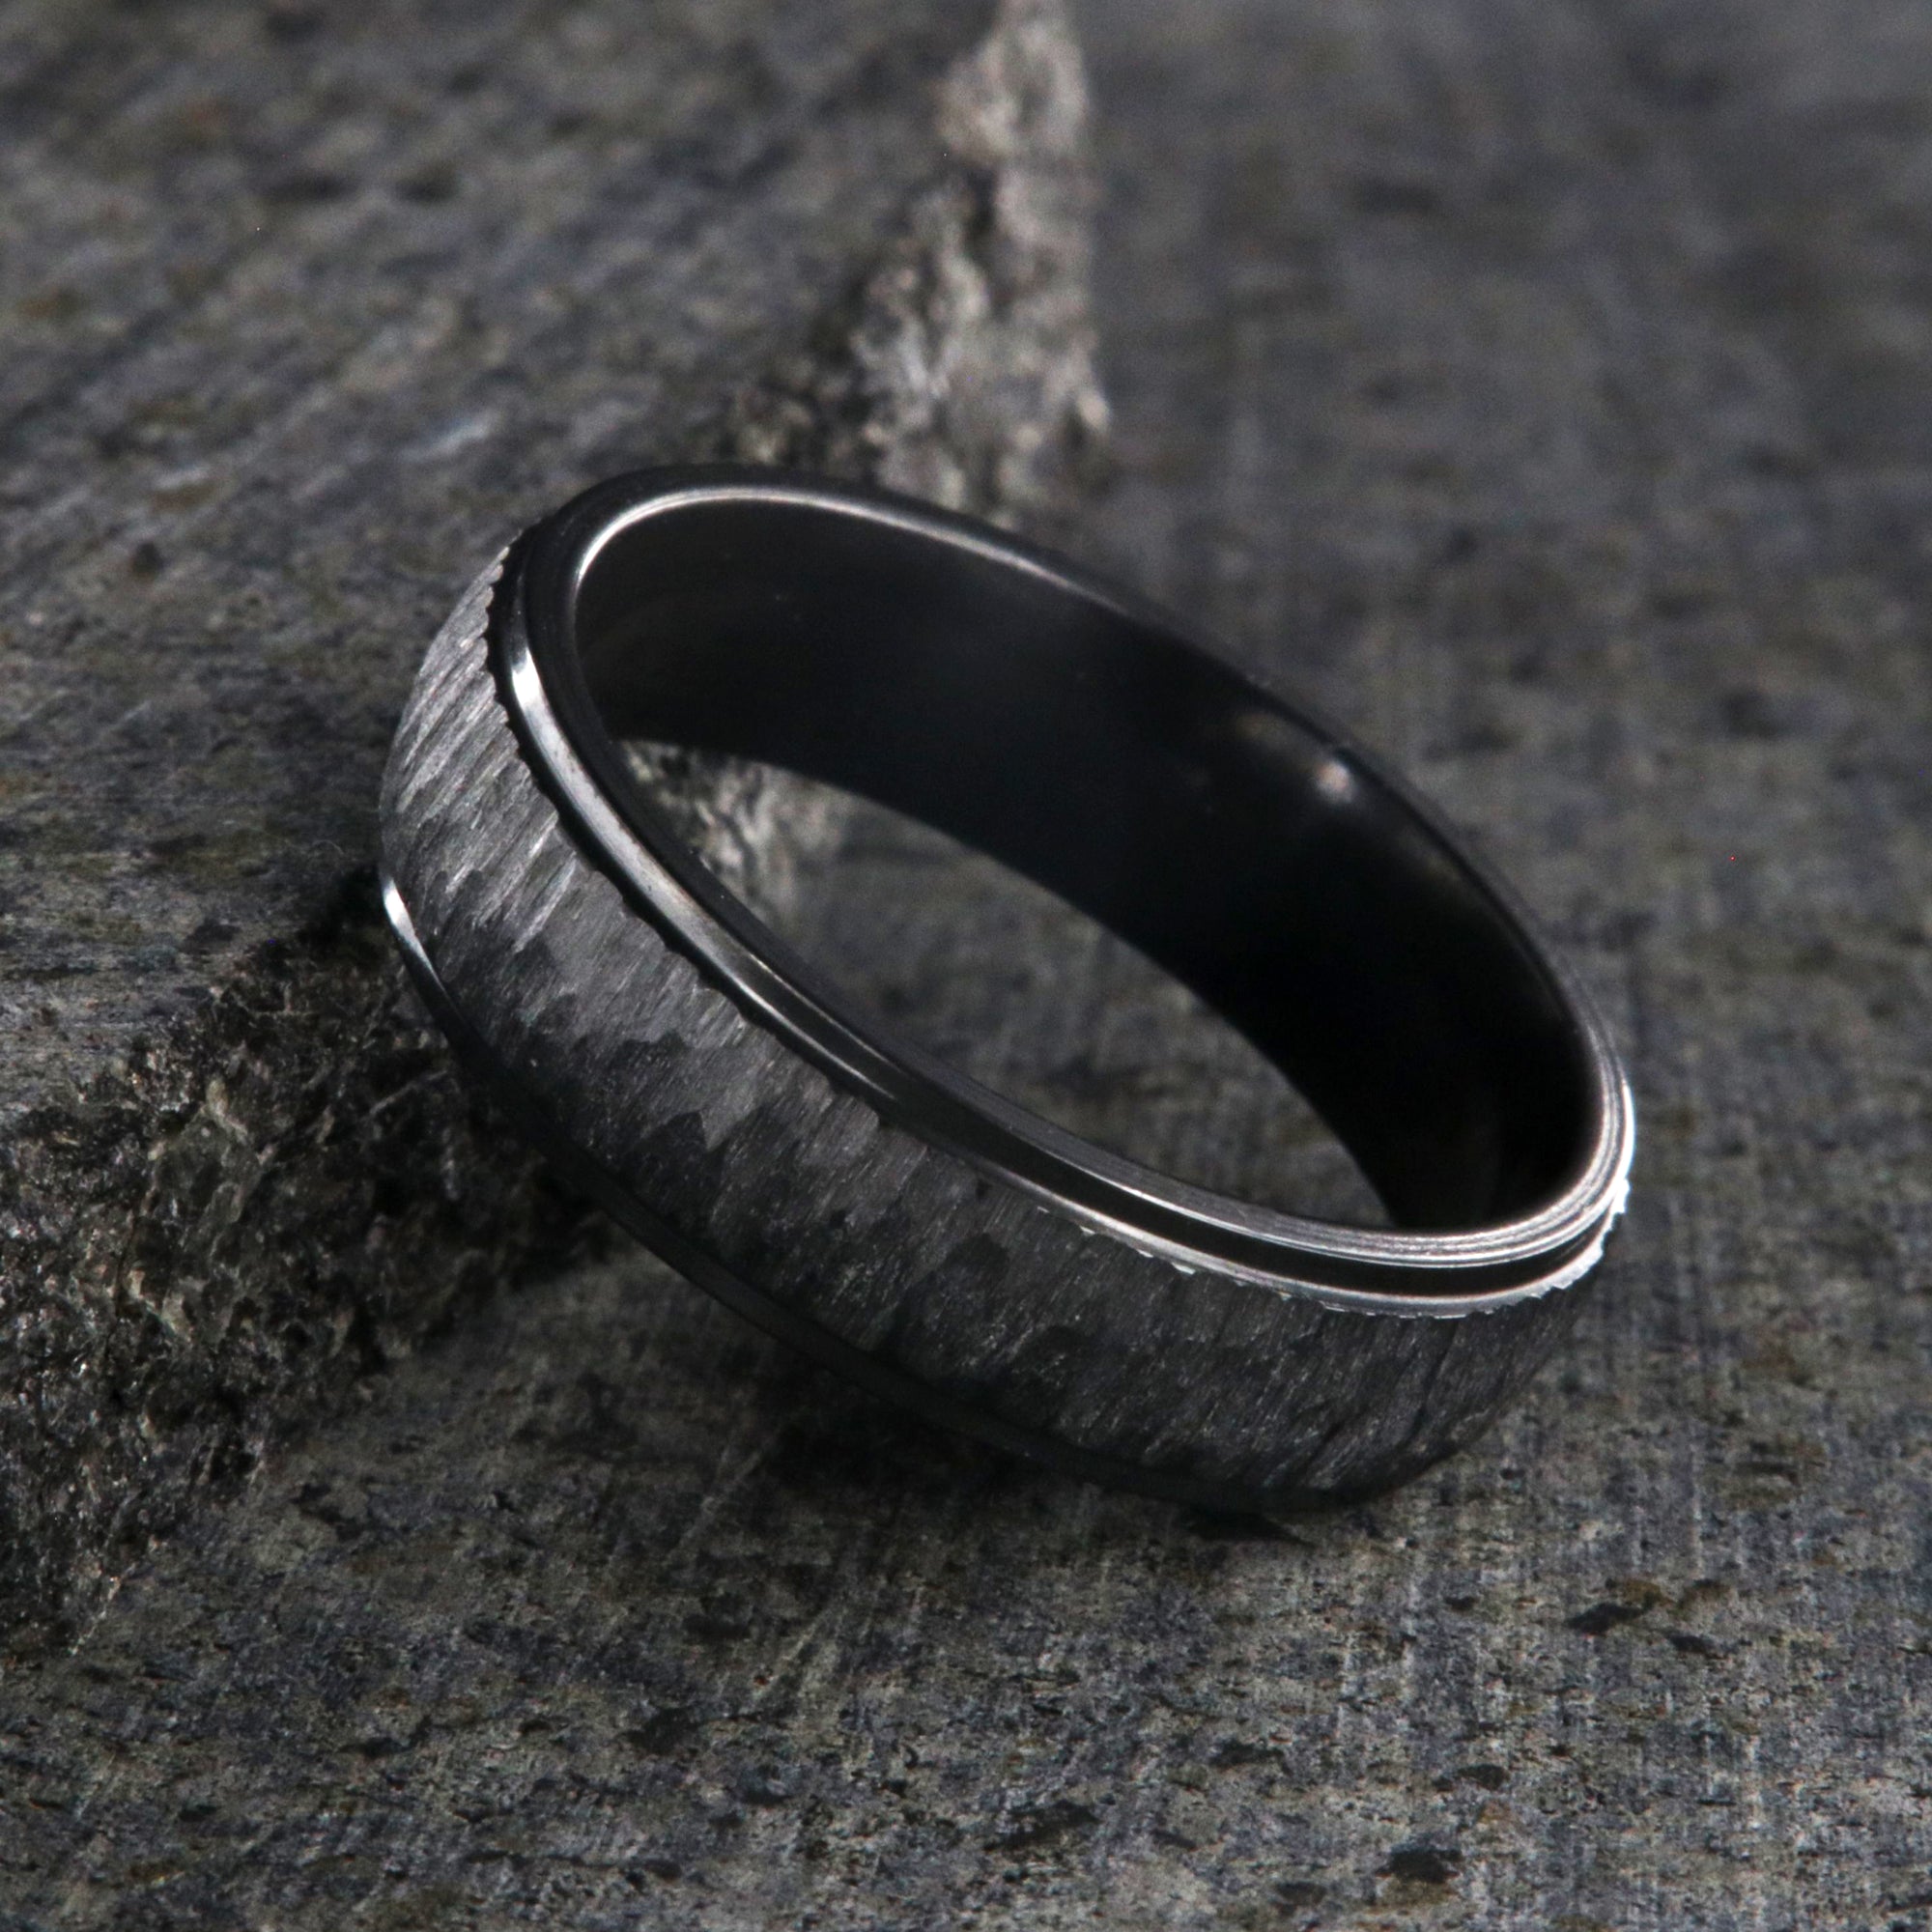 5mm wide black zirconium ring with a raised-center and tree bark finish